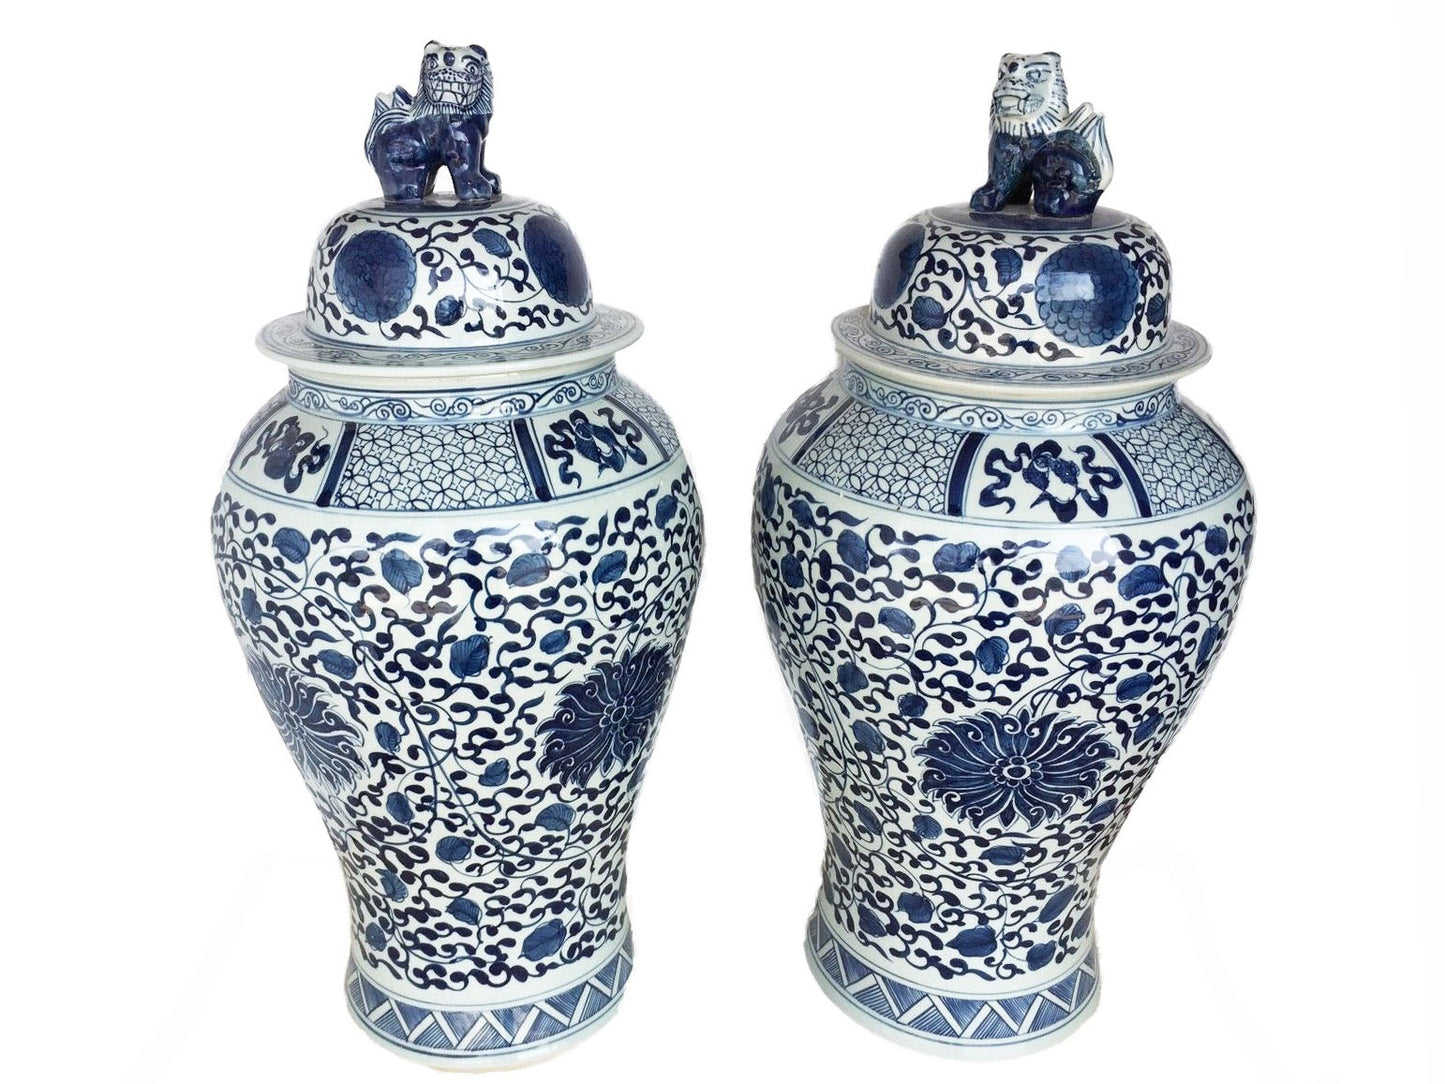 #996 Large Chinoiserie Blue and White Porcelain Ginger Jars -Pair